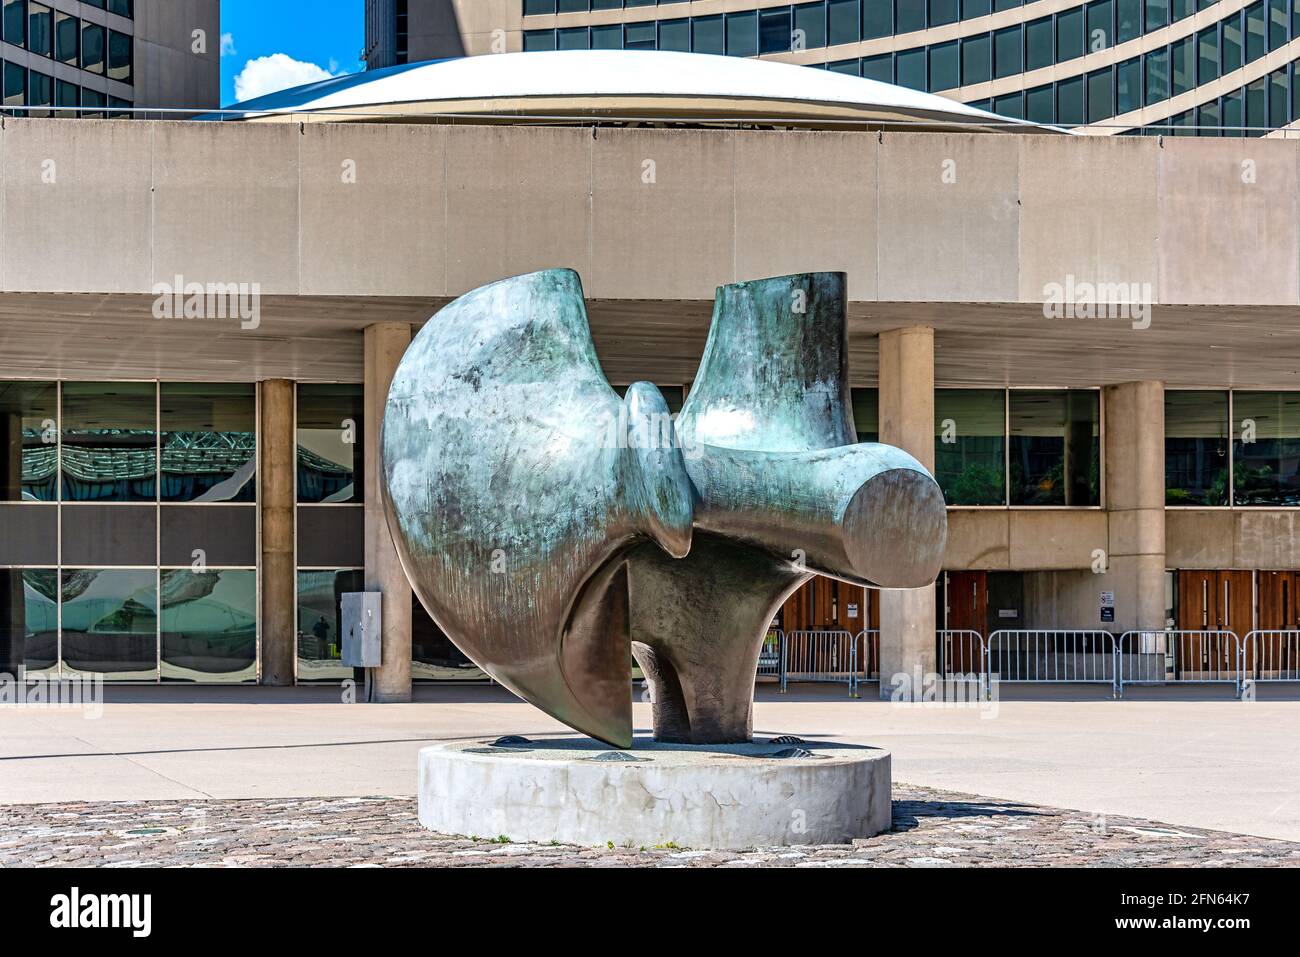 The sculpture named 'The Archer' by Henry Moore in the New City Hall in Nathan Phillips Square, Toronto, Canada Stock Photo